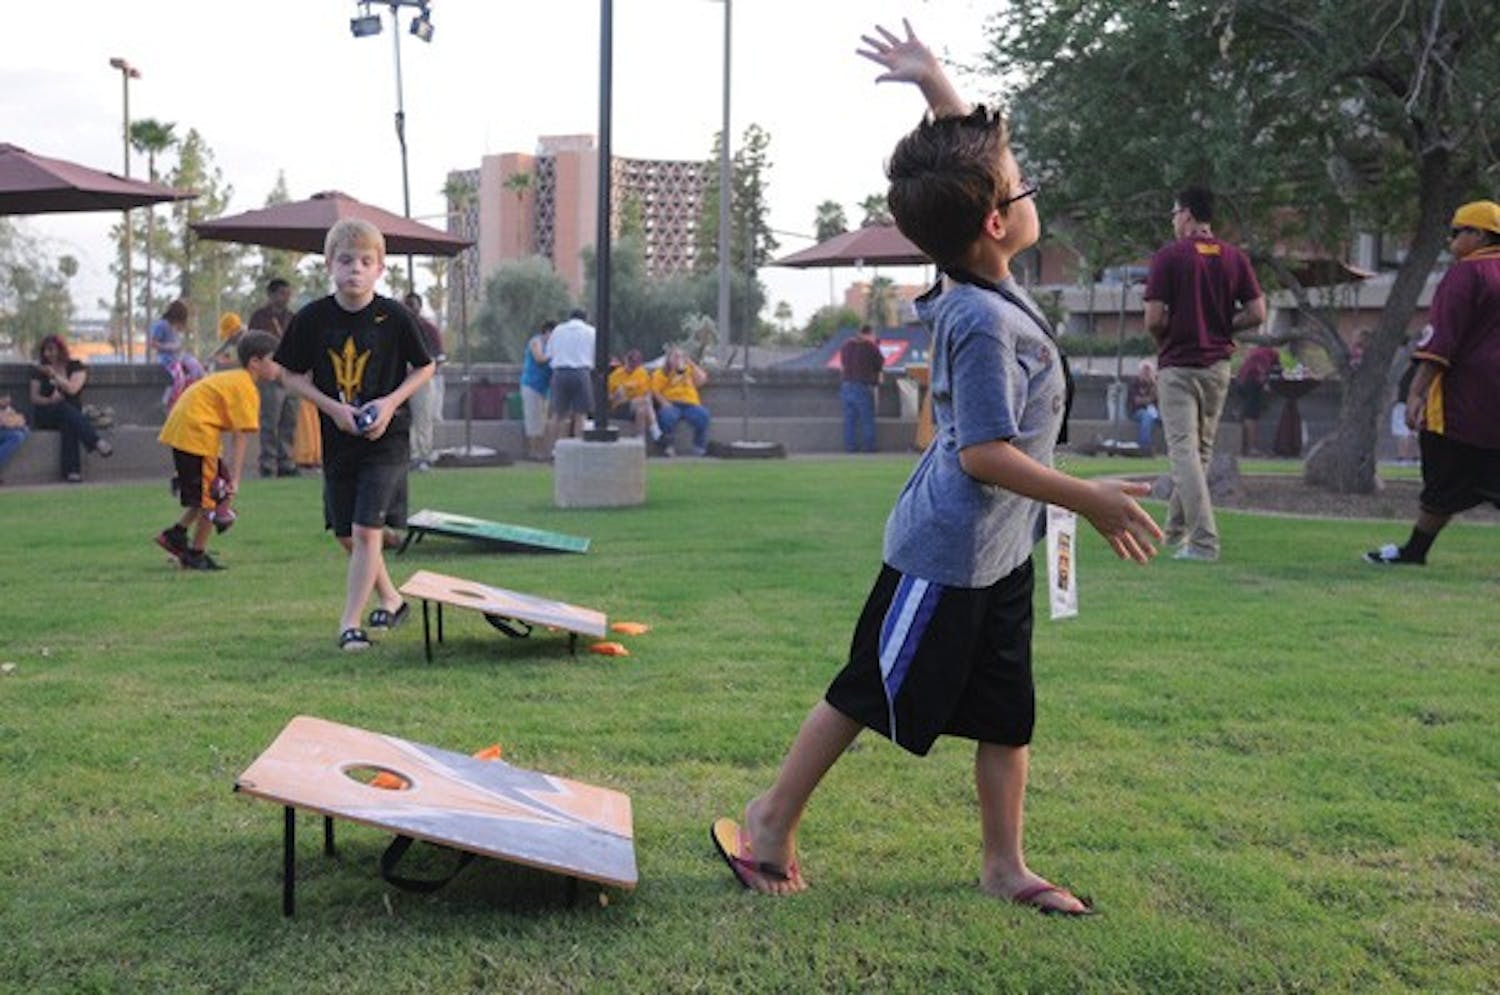 Young ASU fans play cornhole prior to the ASU vs. Utah game Sept. 22 at the Desert Arboretum Park on the Tempe campus. (Photo by Aaron Lavinsky)